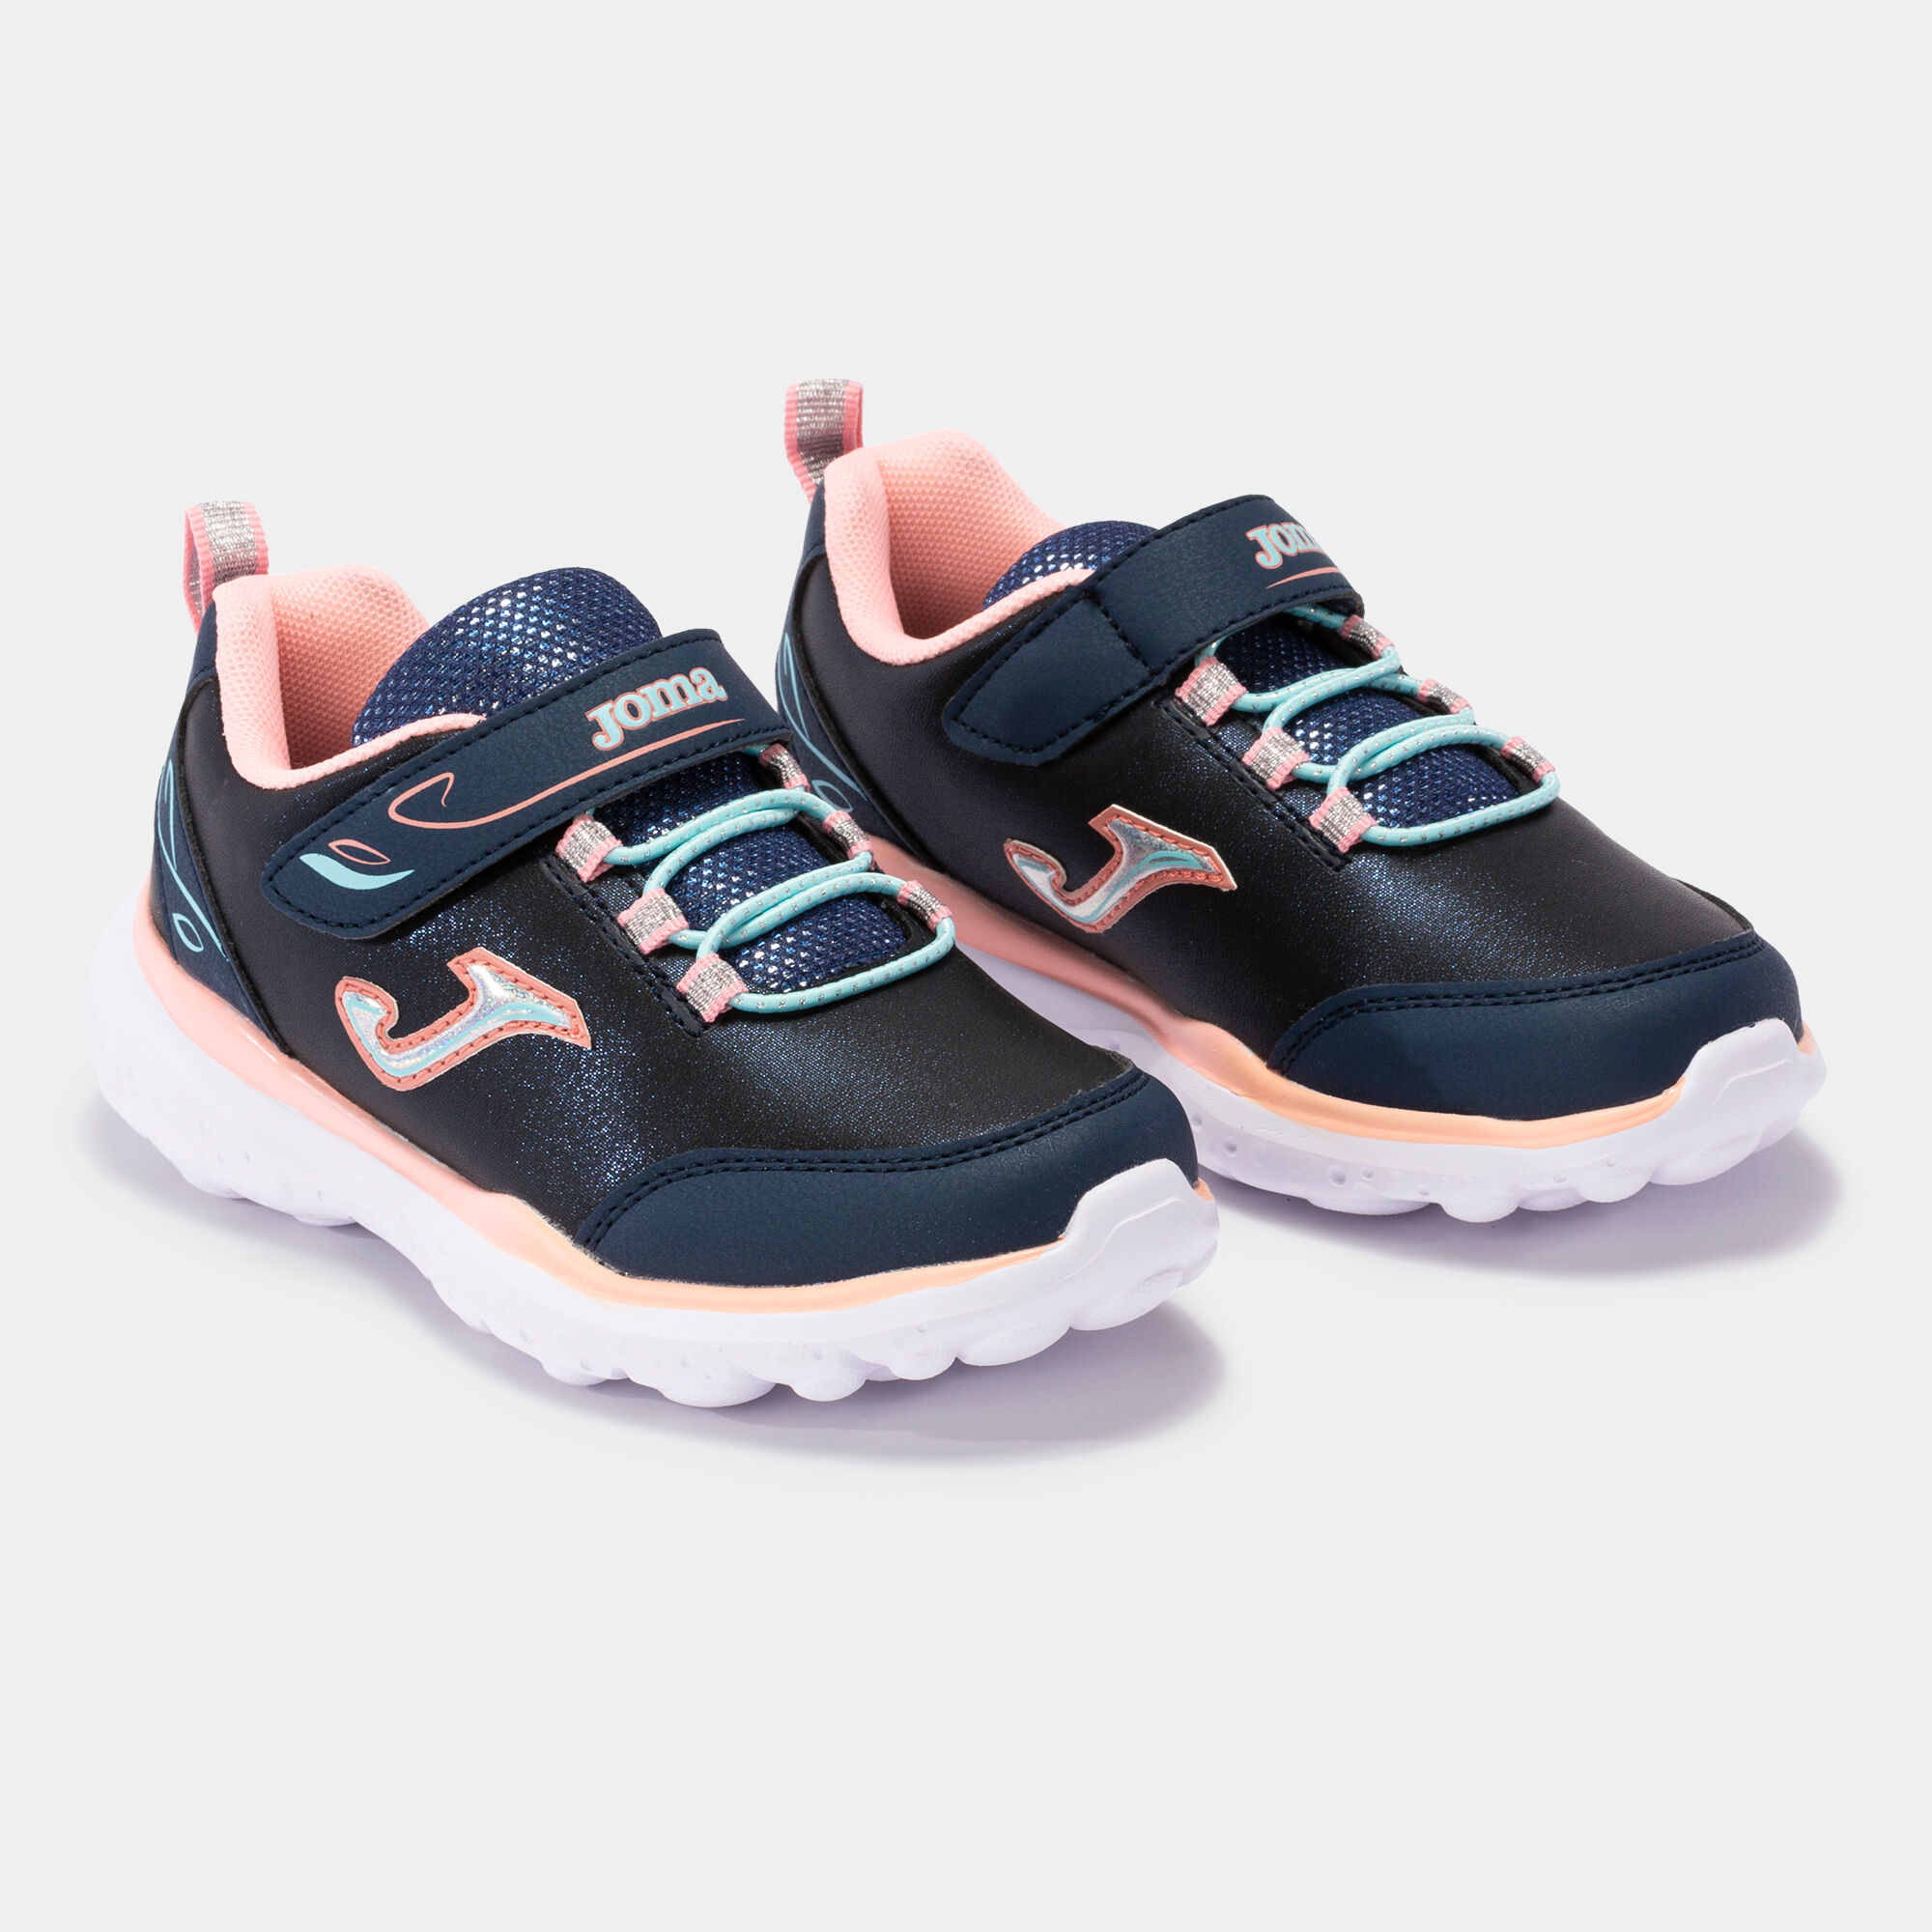 CASUAL SHOES BUTTERFLY 22 JUNIOR NAVY BLUE PINK